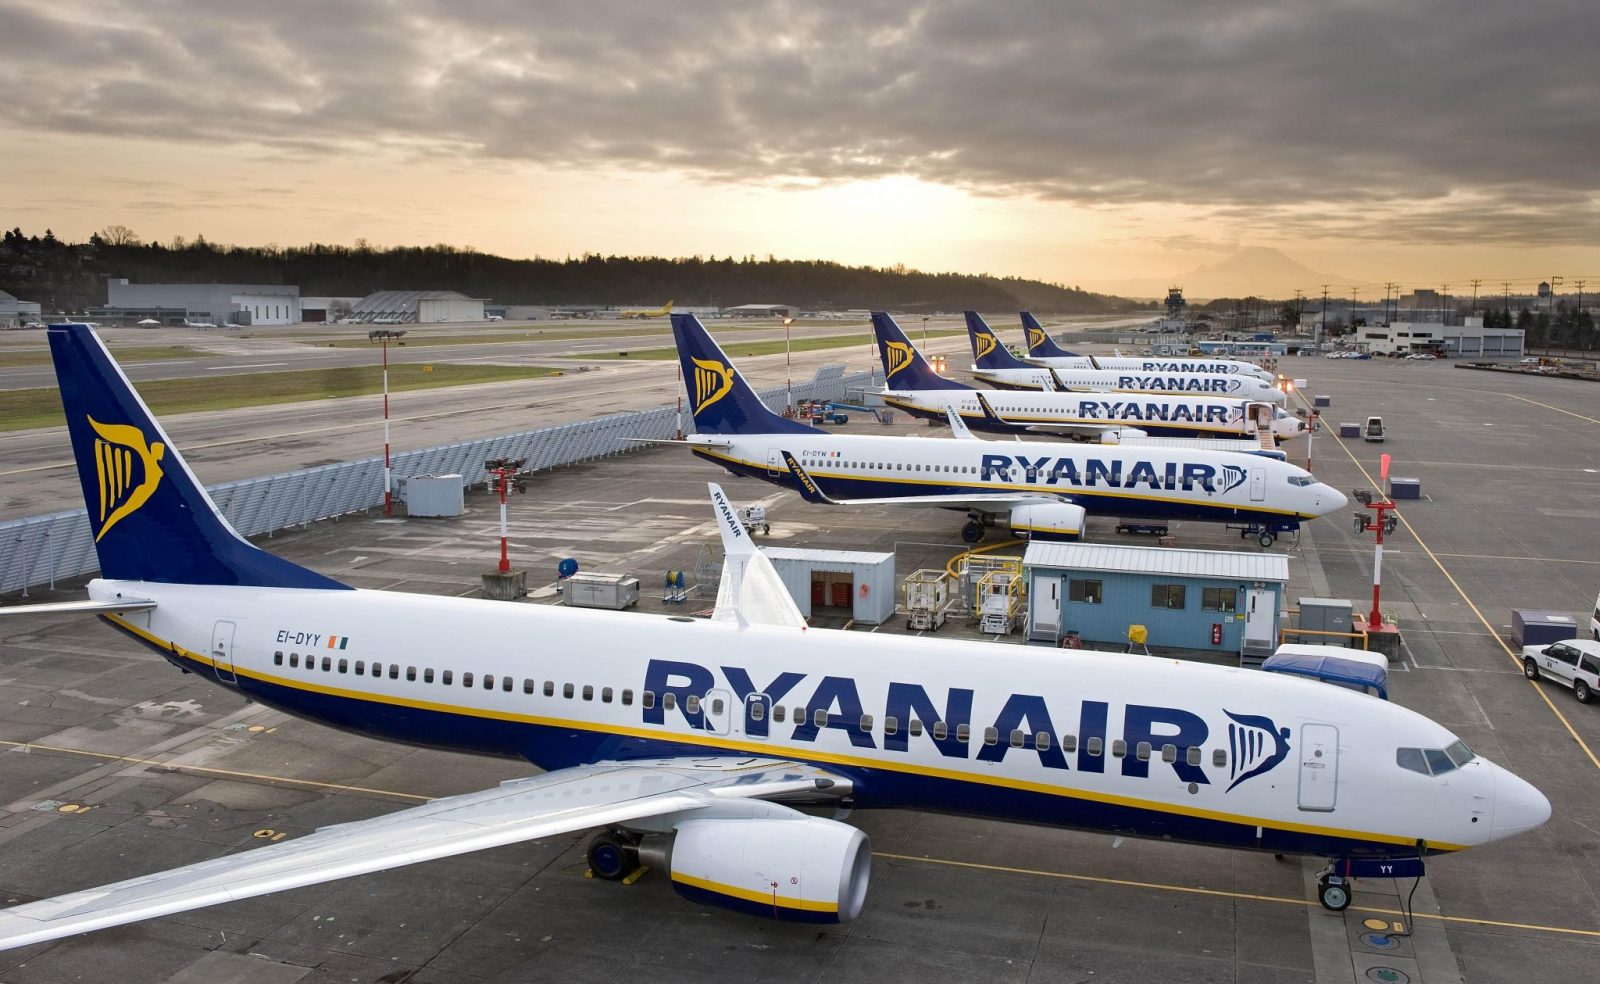 Ryanair Has a Plan to Prevent Flight Delays - Ban Passengers from Bringing Bags into the Cabin